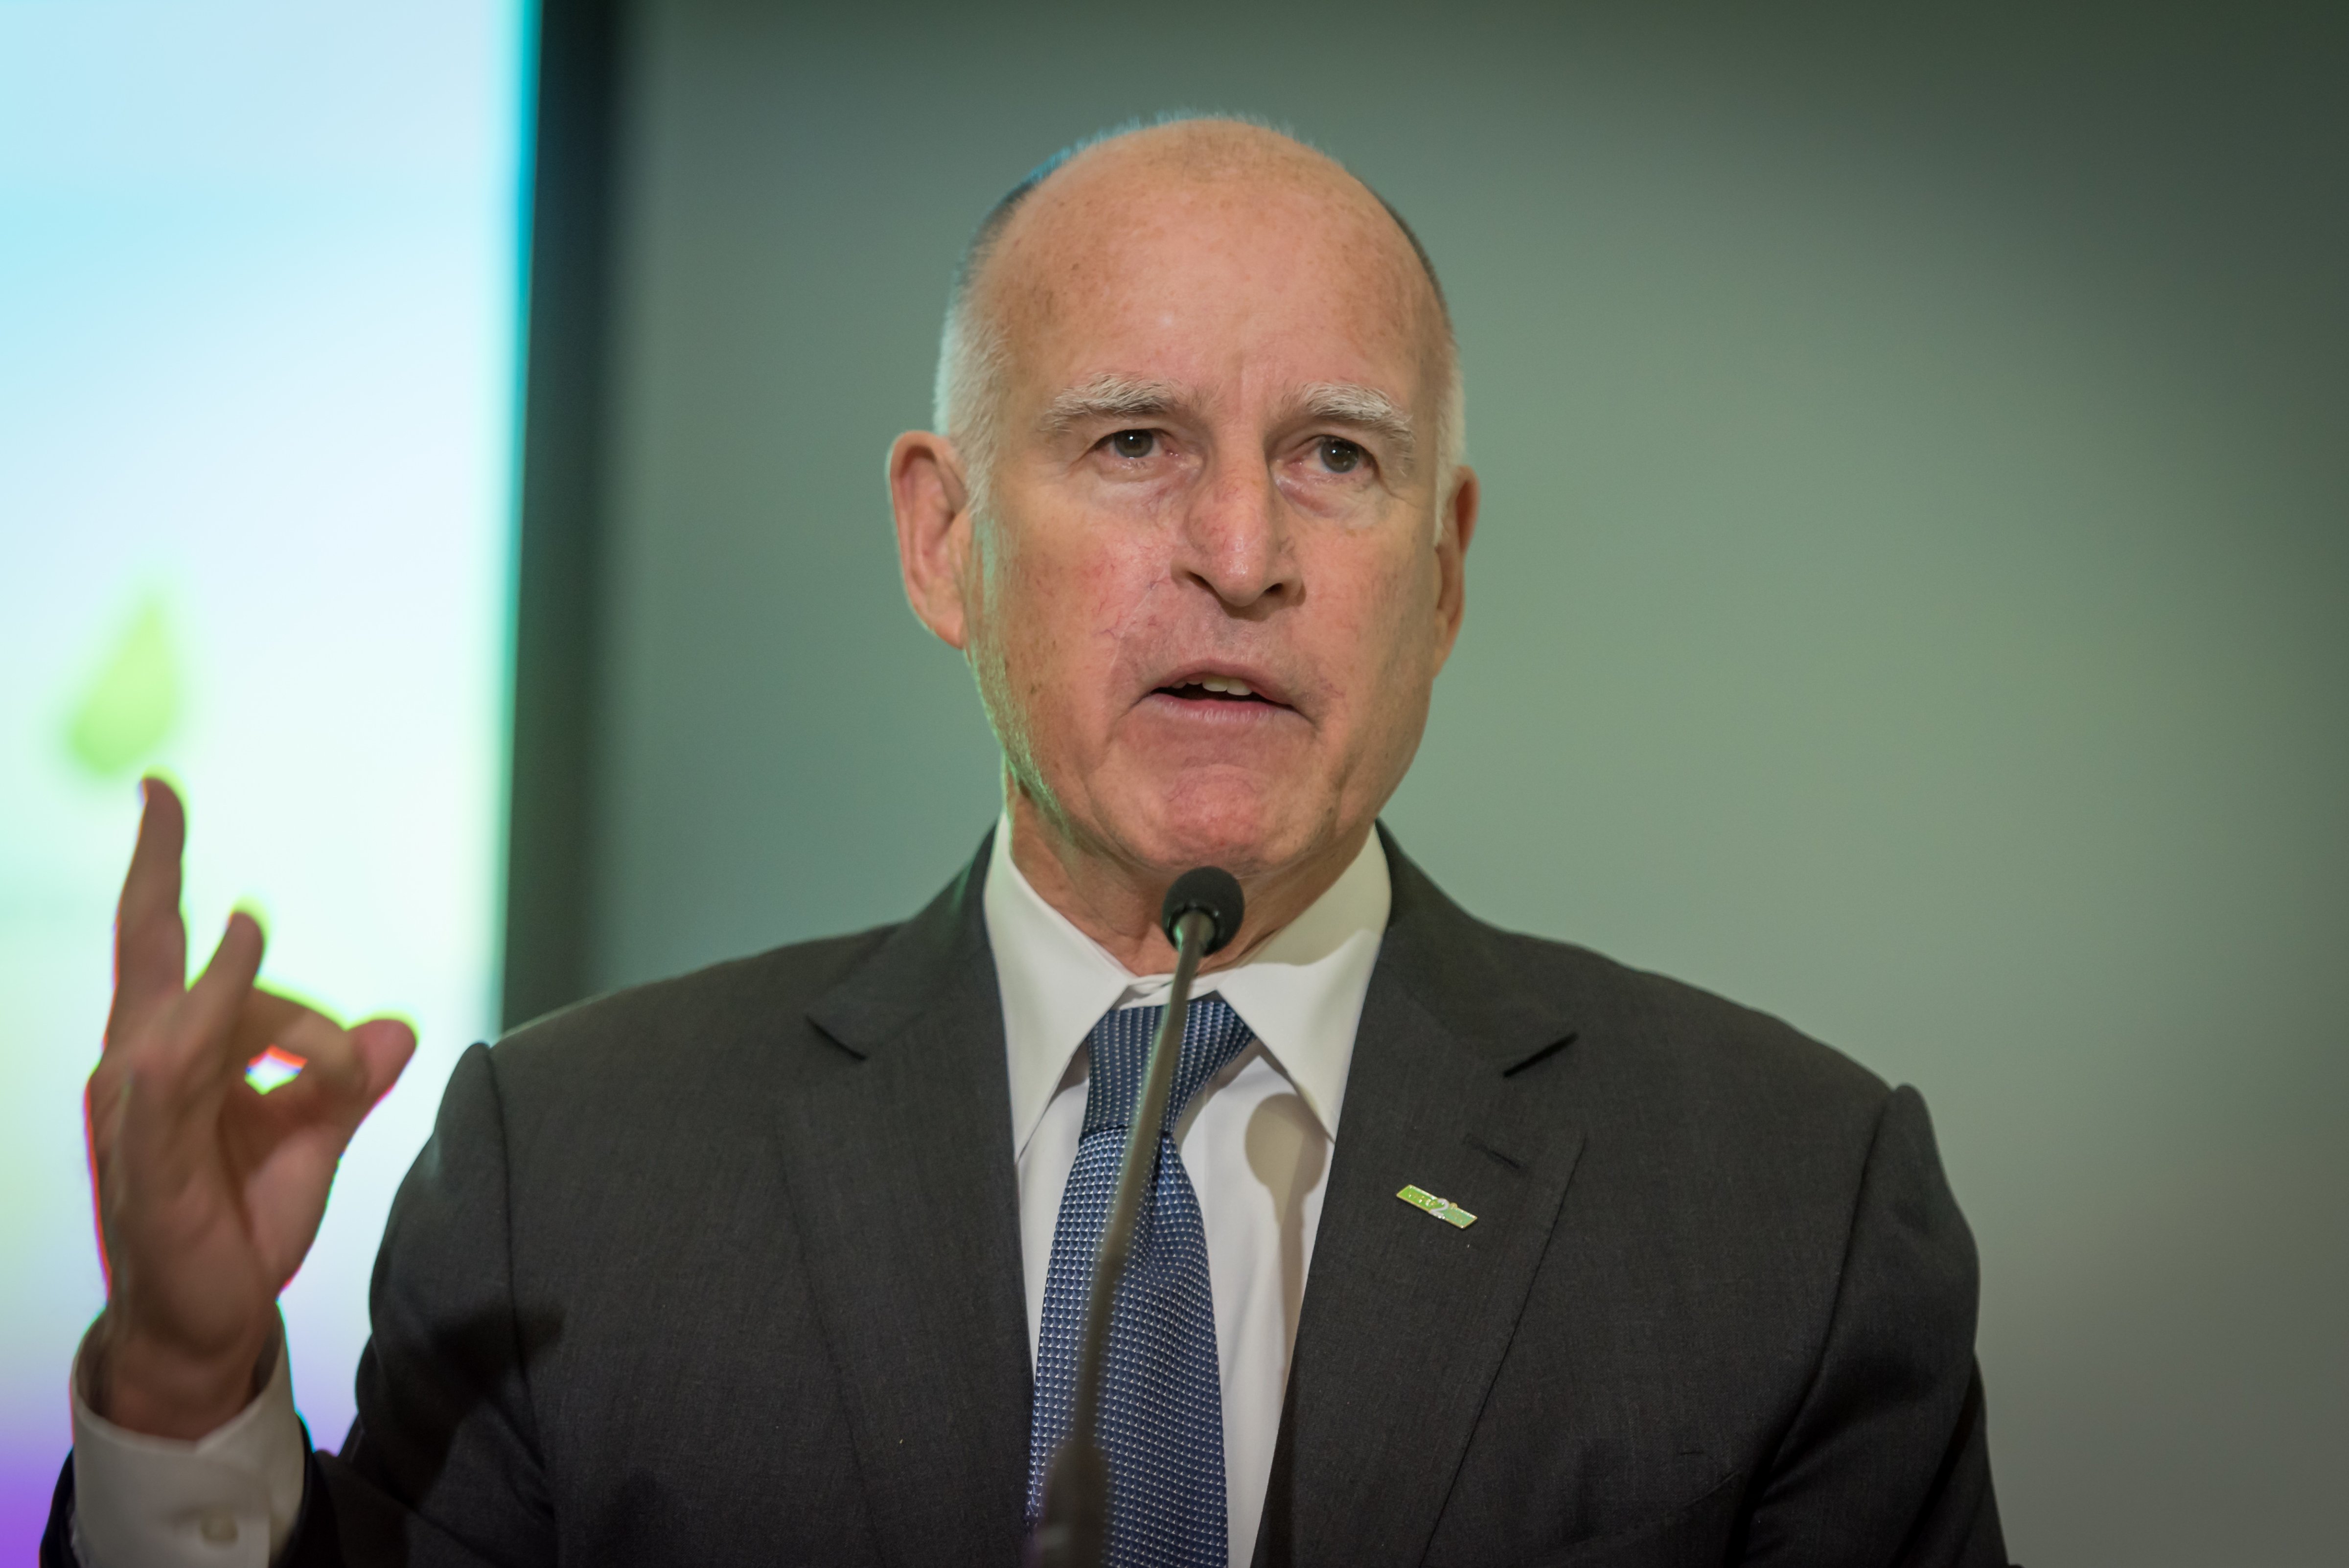 U.S. Governor Edmund G. Brown Jr. of California as he speaks during a panel entitled "Lima-Paris Action Agenda Focus on Cities, on the United Nations Climate Change Conference Cop21" in Paris. (Pacific Press&mdash;LightRocket via Getty Images)